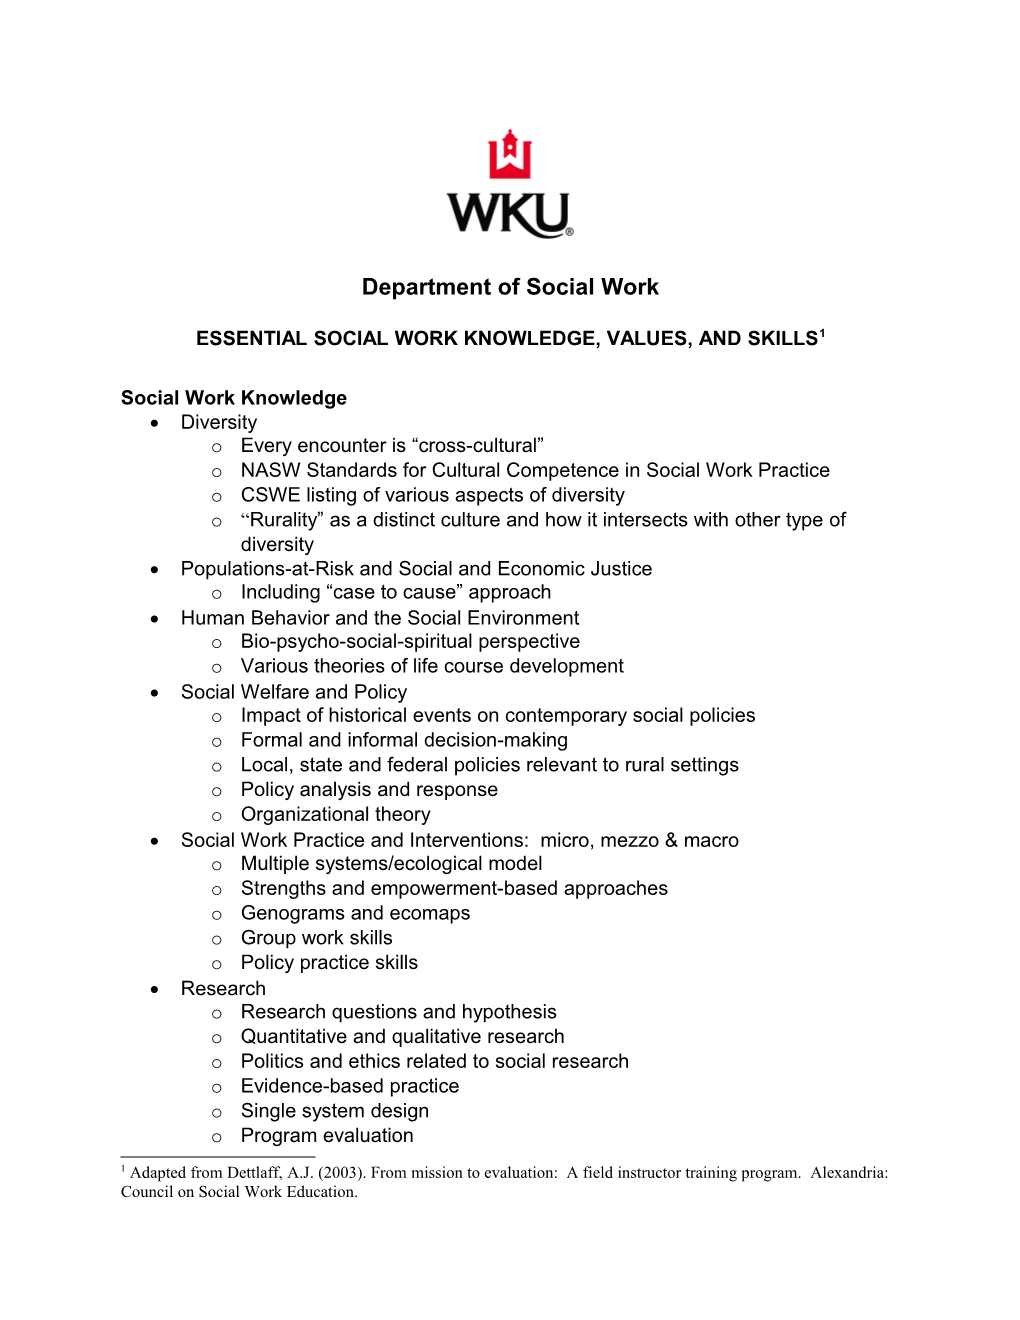 Essential Social Work Knowledge, Values, and Skills 1